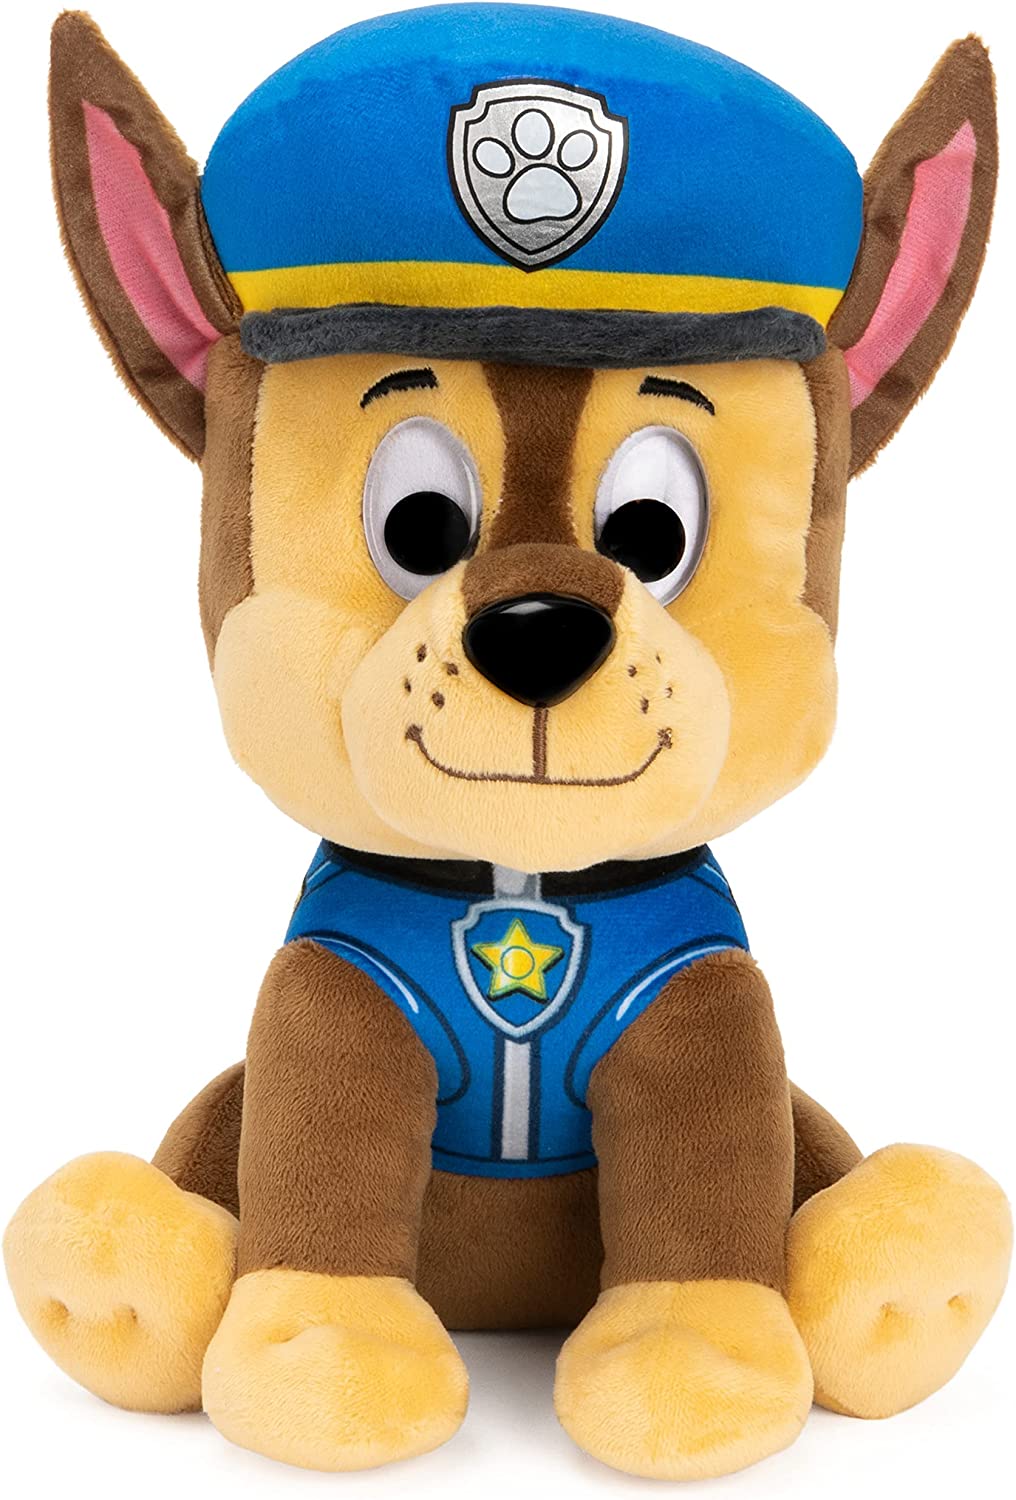 Genuine Paw Patrol Plush Stuffed Animal 5 Characters 9 inch 22.9cm Chase  Rubble Marshall Skye Patrulla Canina Children Toy Doll